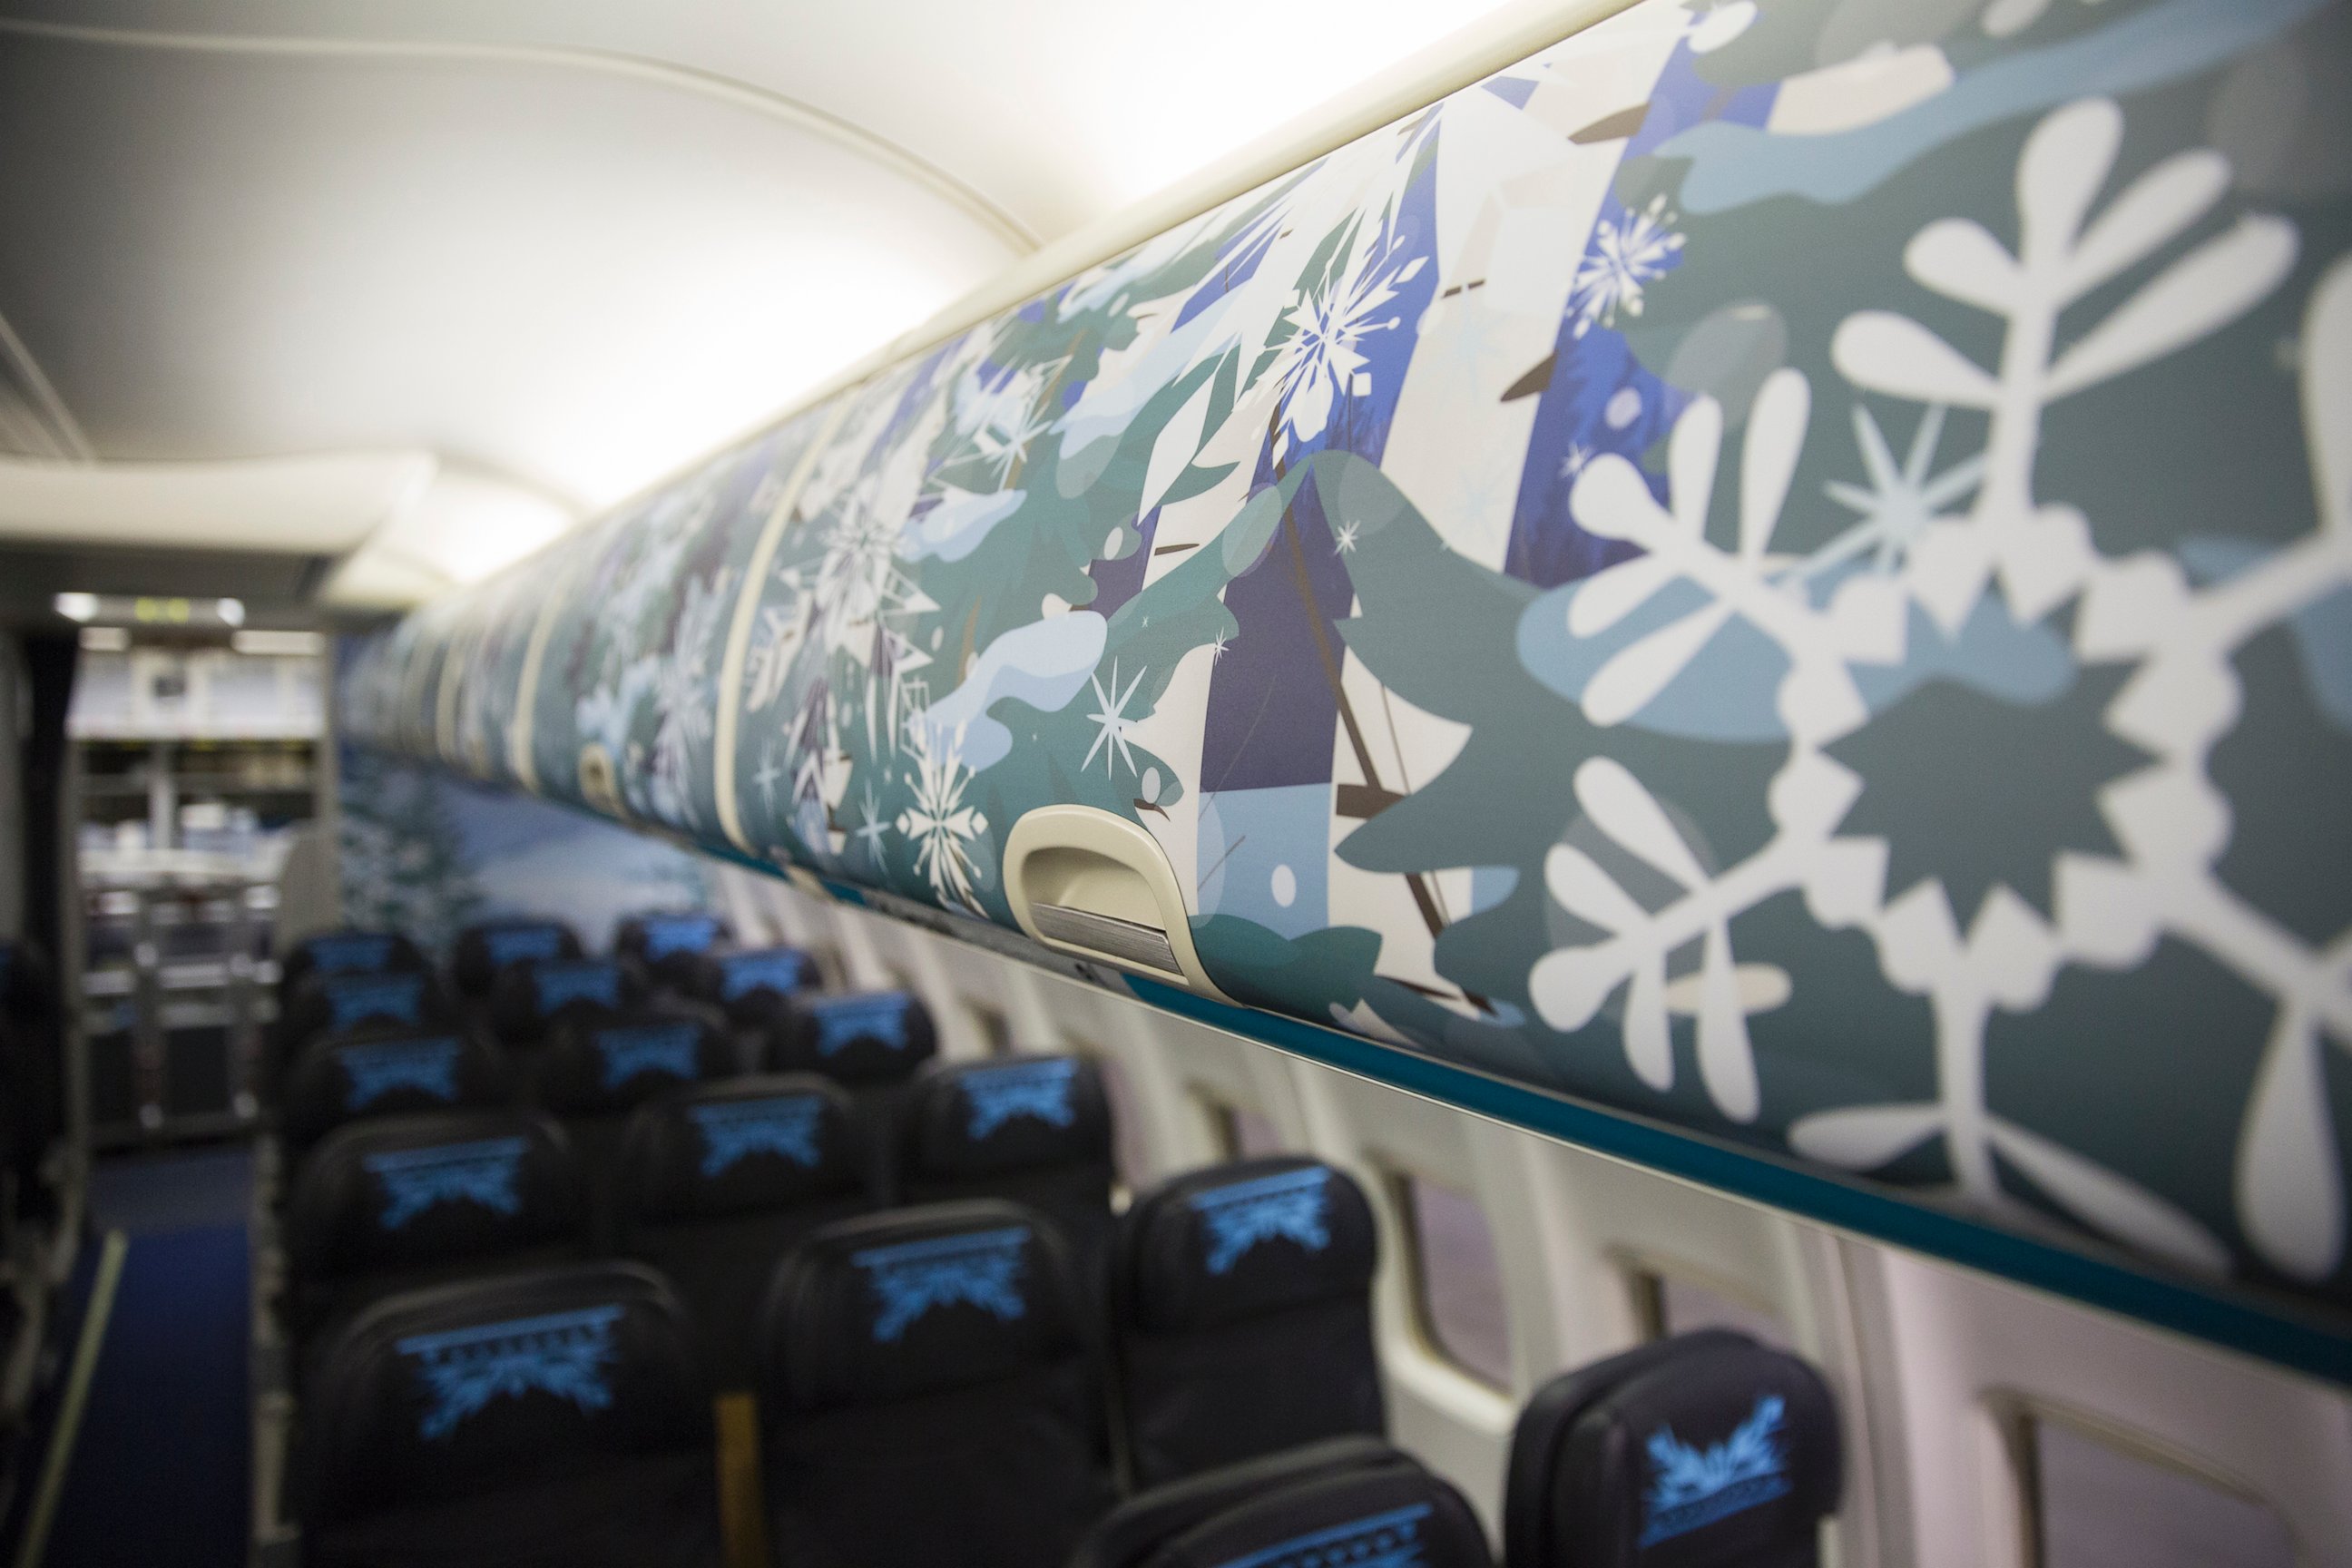 PHOTO: On Oct. 18, 2015, WestJet announced a custom-painted aircraft decorated with characters from the Disney film, "Frozen." 